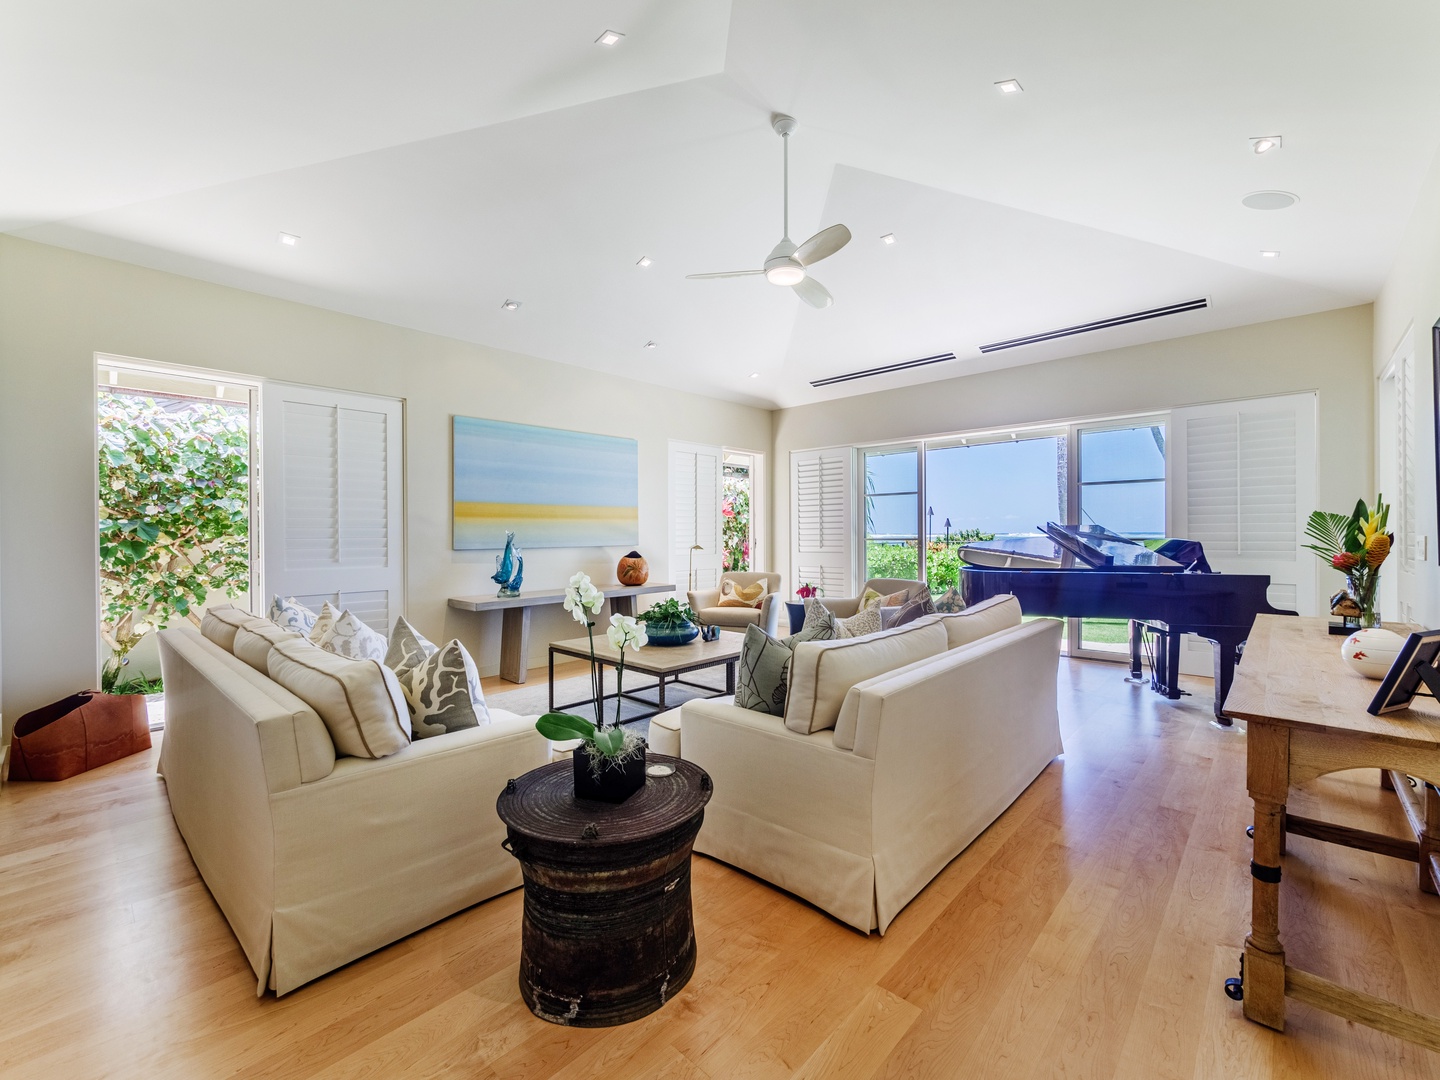 Honolulu Vacation Rentals, Paradise Beach Estate - Sink into the warmth of our cozy living area, a haven of comfort designed for relaxation and cherished moments.